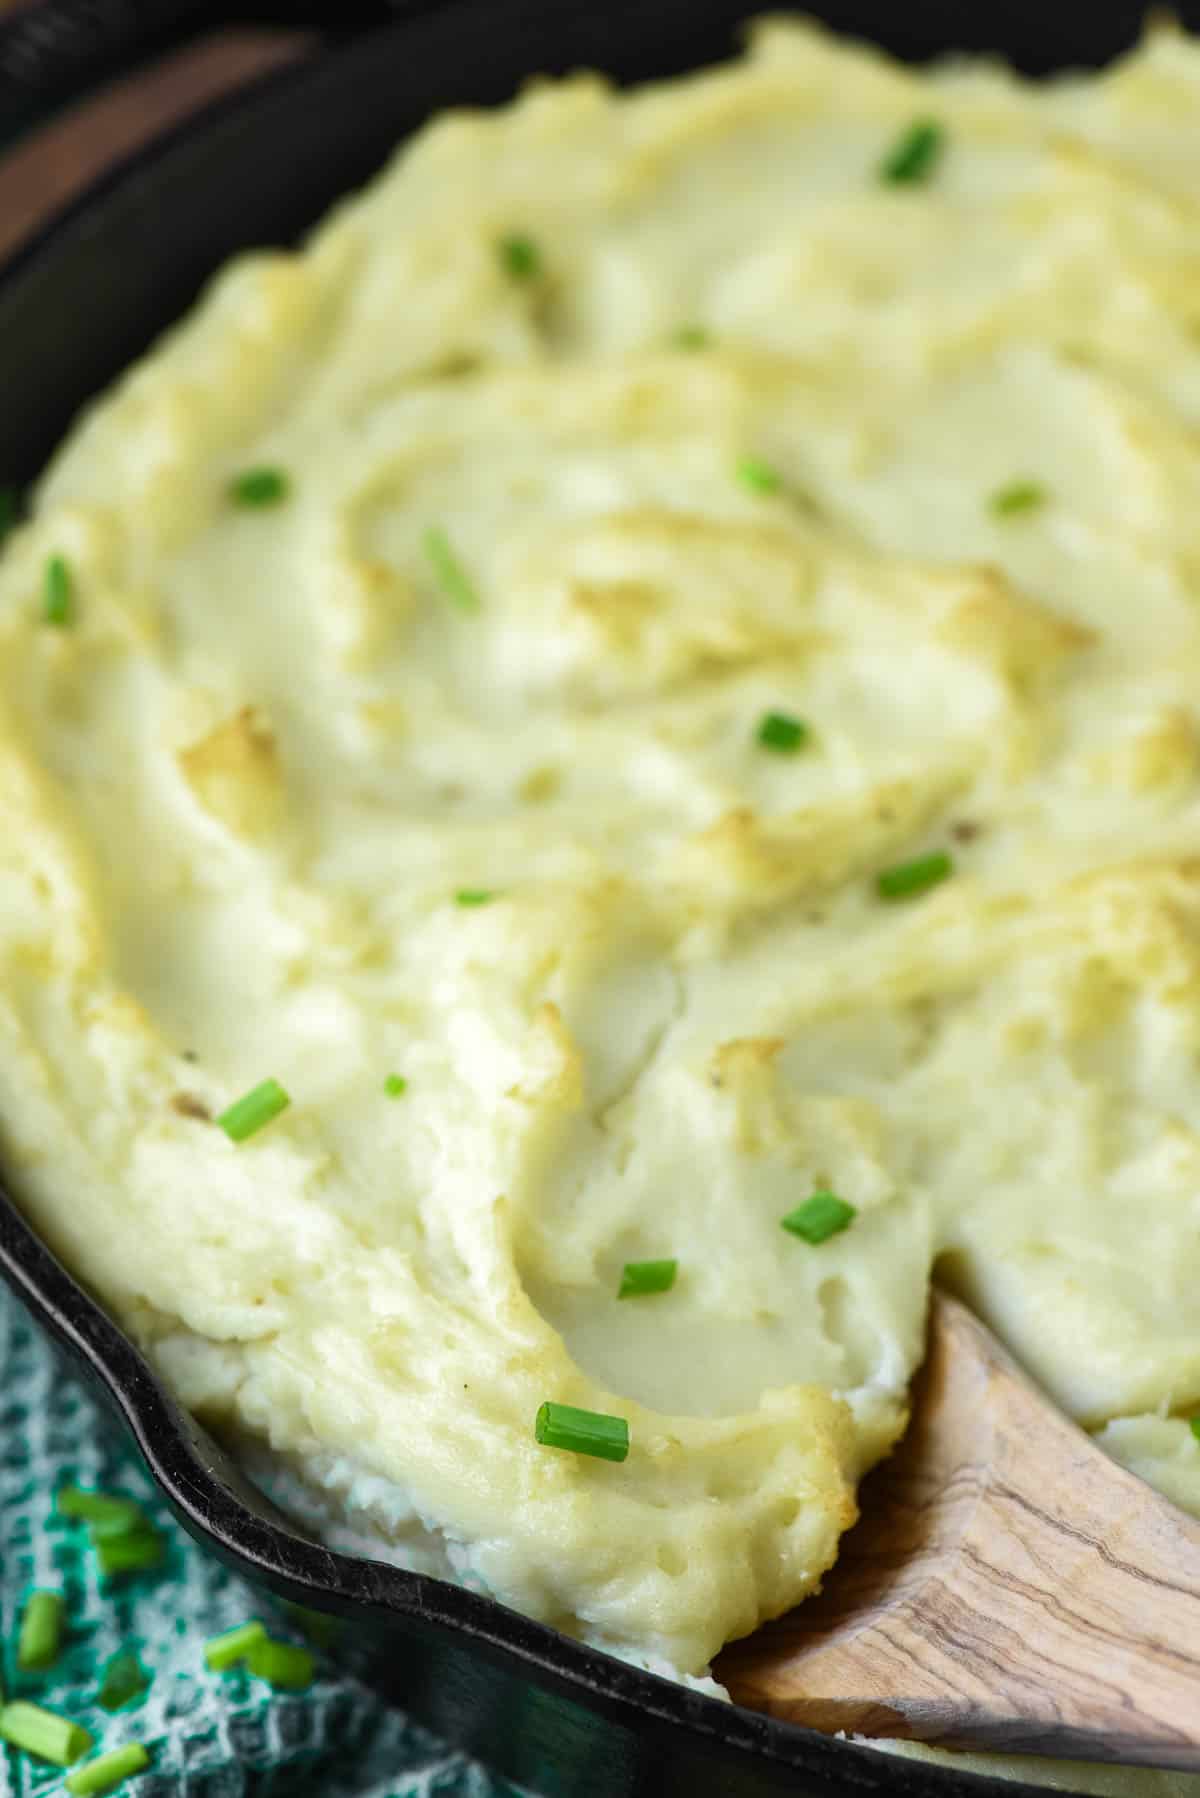 wooden spoon dipped in cast iron skillet with smoked mashed potatoes